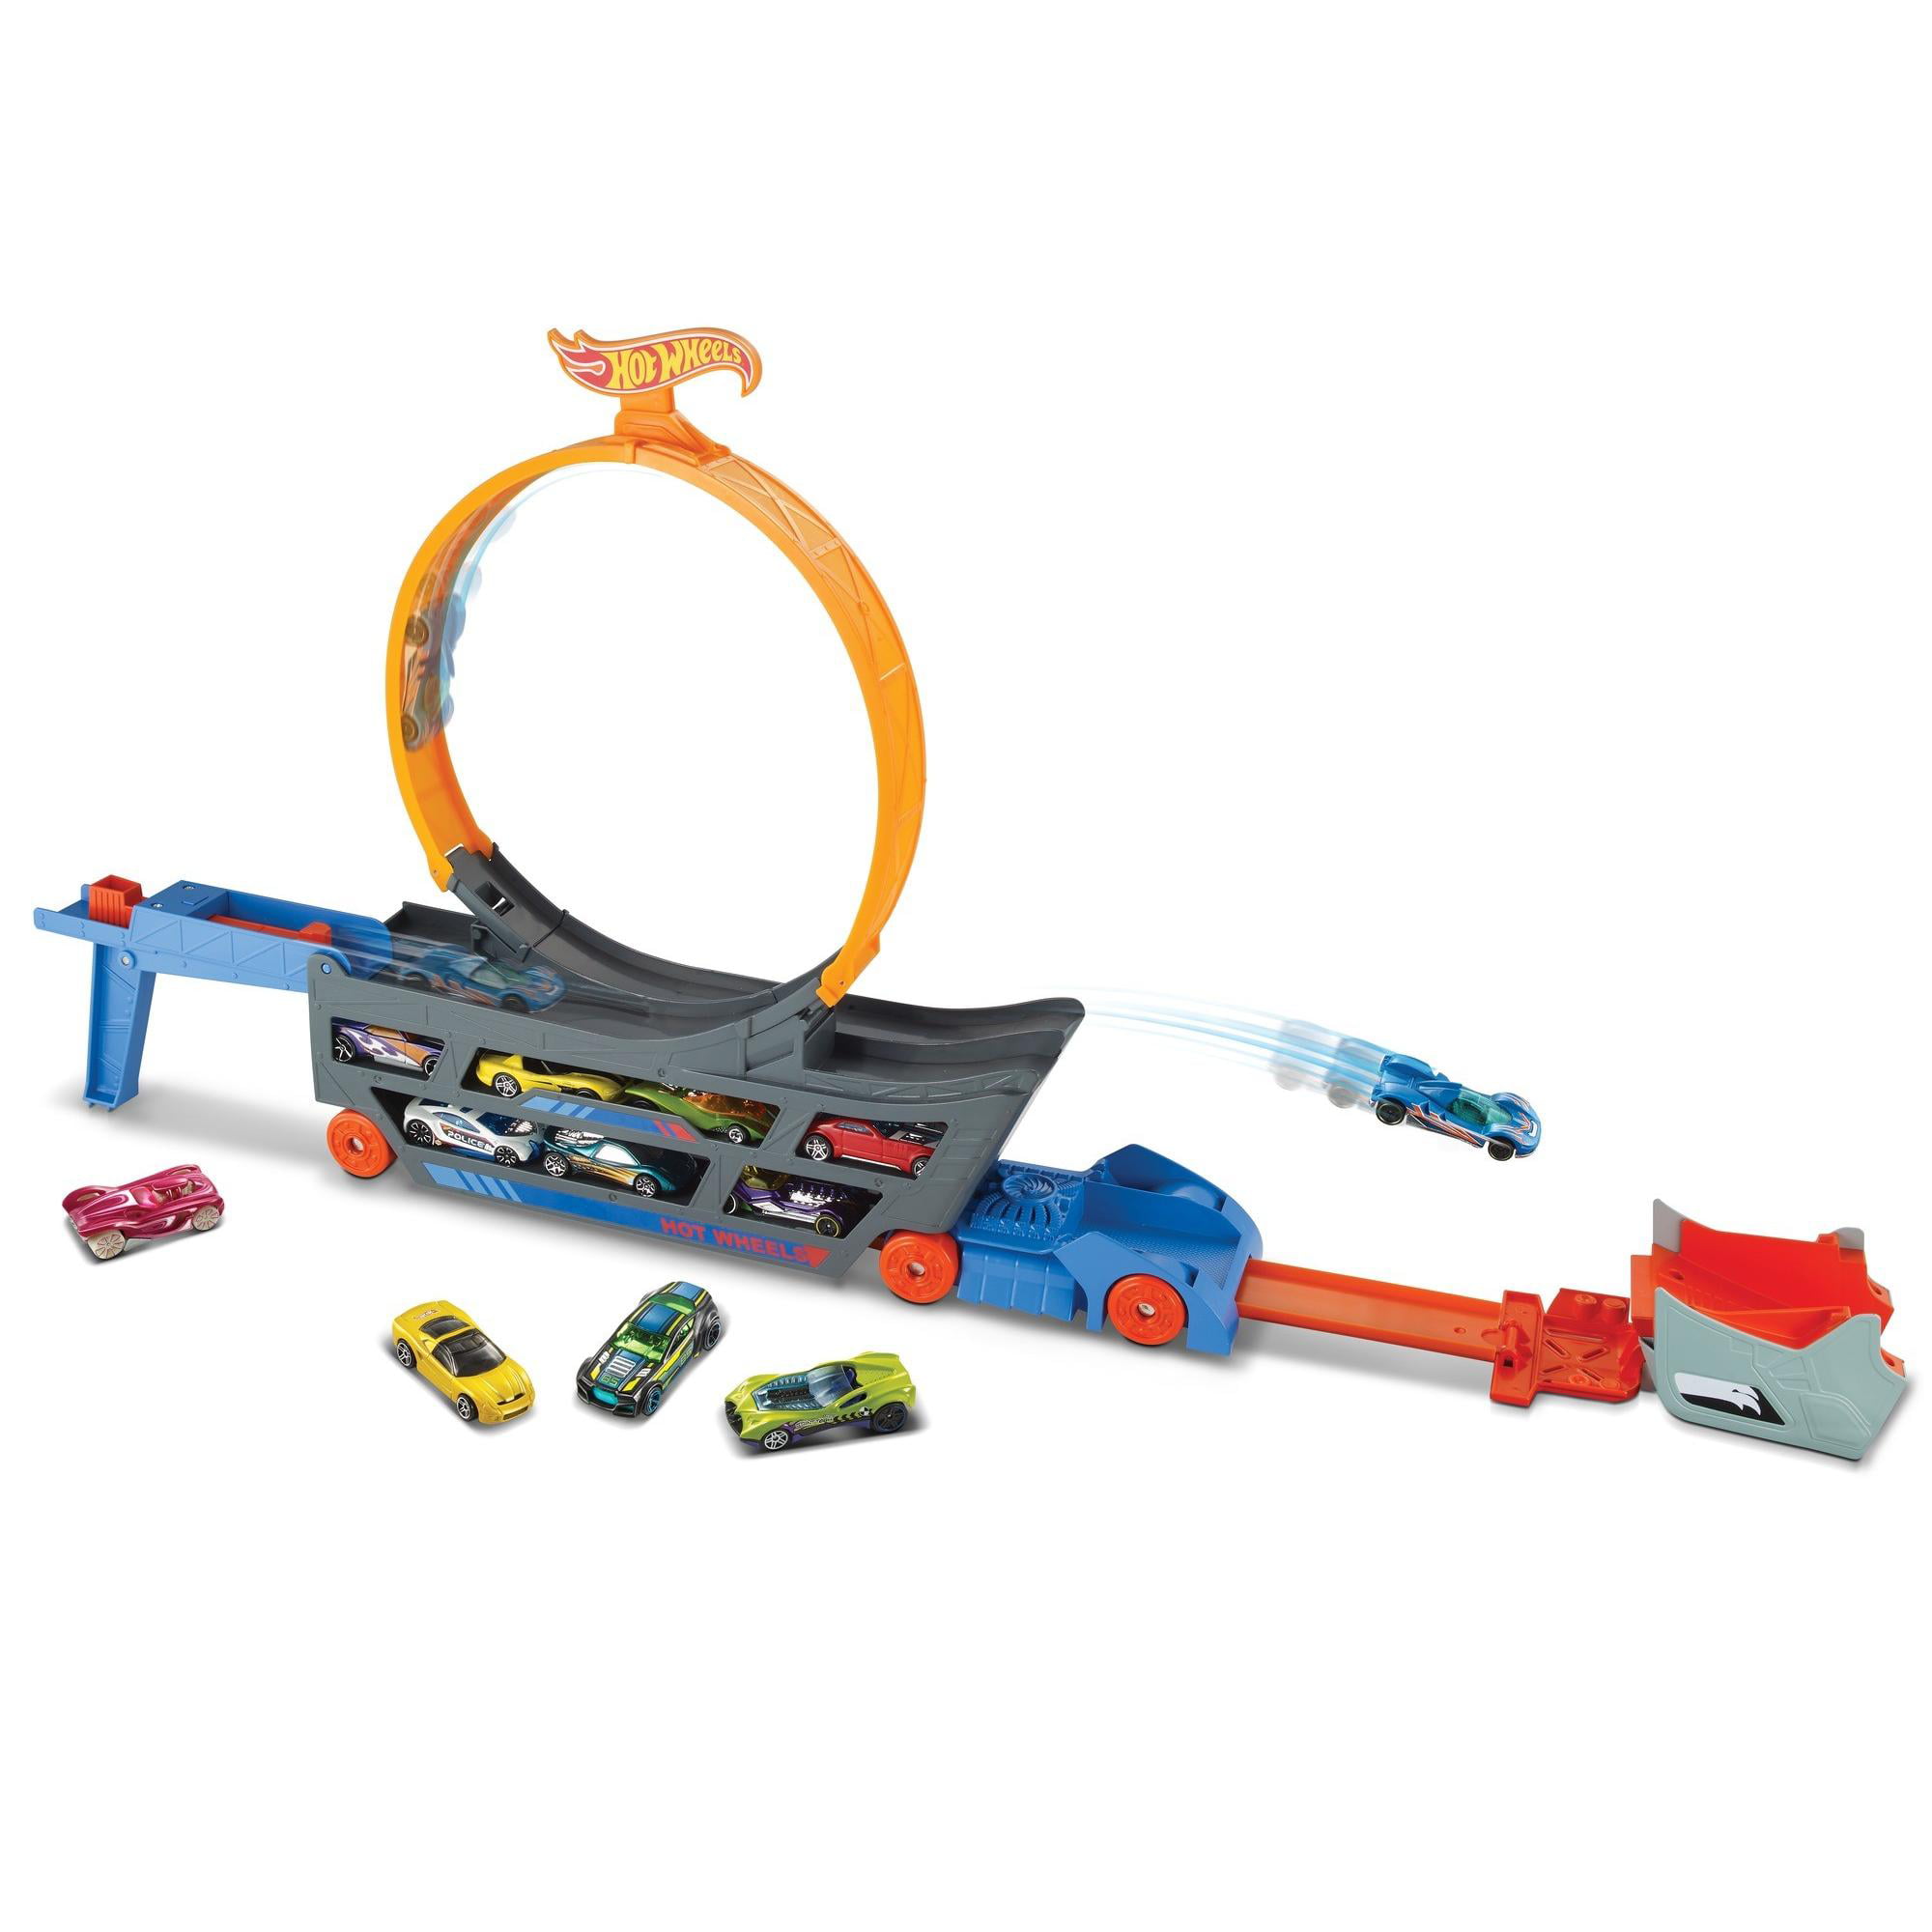 Hot Wheels Speedy's Dealership City Sets Vehicle Playset for sale online 